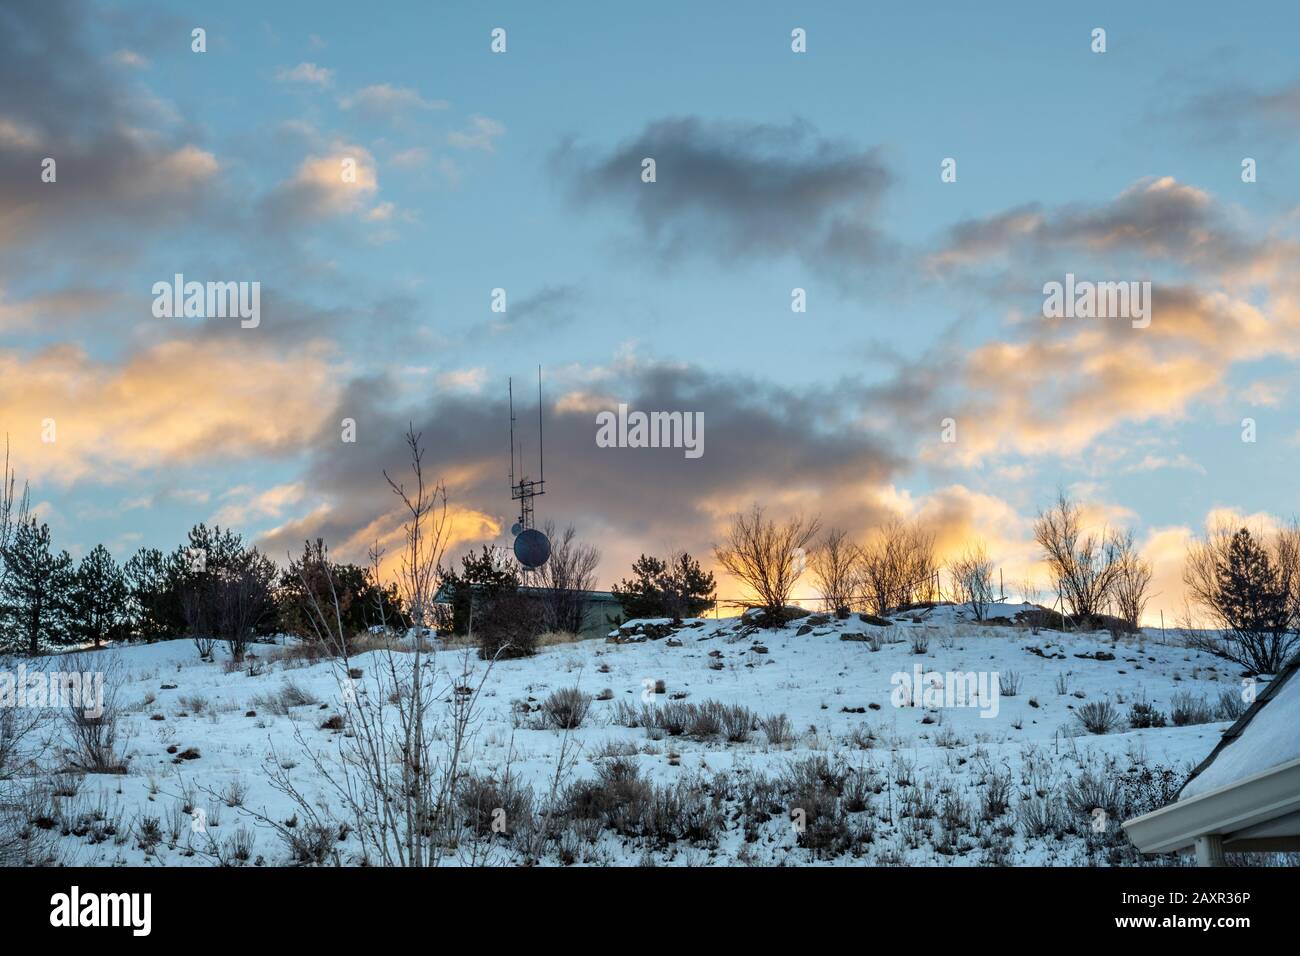 Clouds are illuminated from below under a colorful sky with a TV or satellite dish and antennae on top of a snow covered hill. Stock Photo